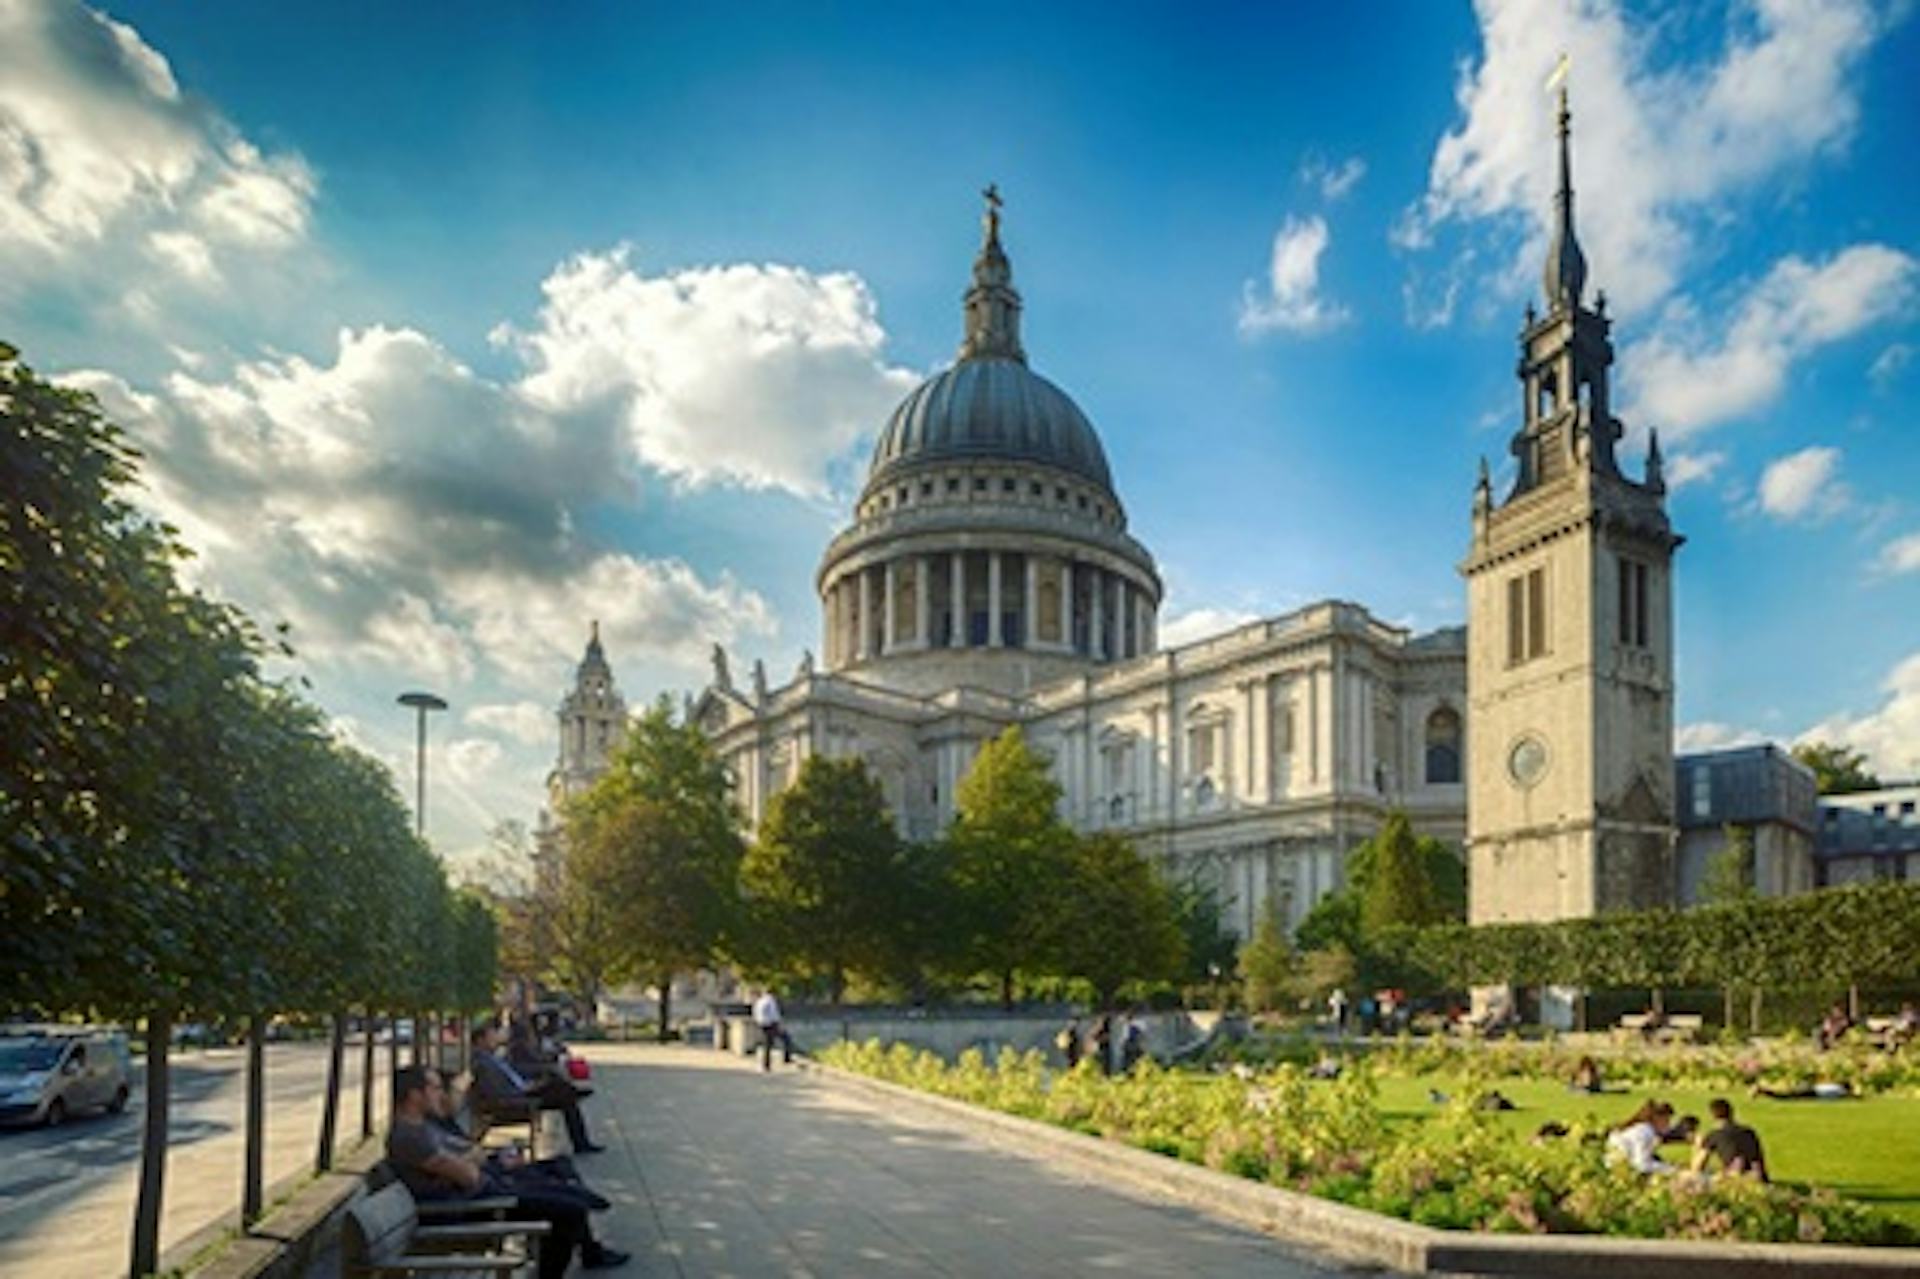 Visit to St Paul's Cathedral with Seafood Platter and Prosecco at Fish Market for Two